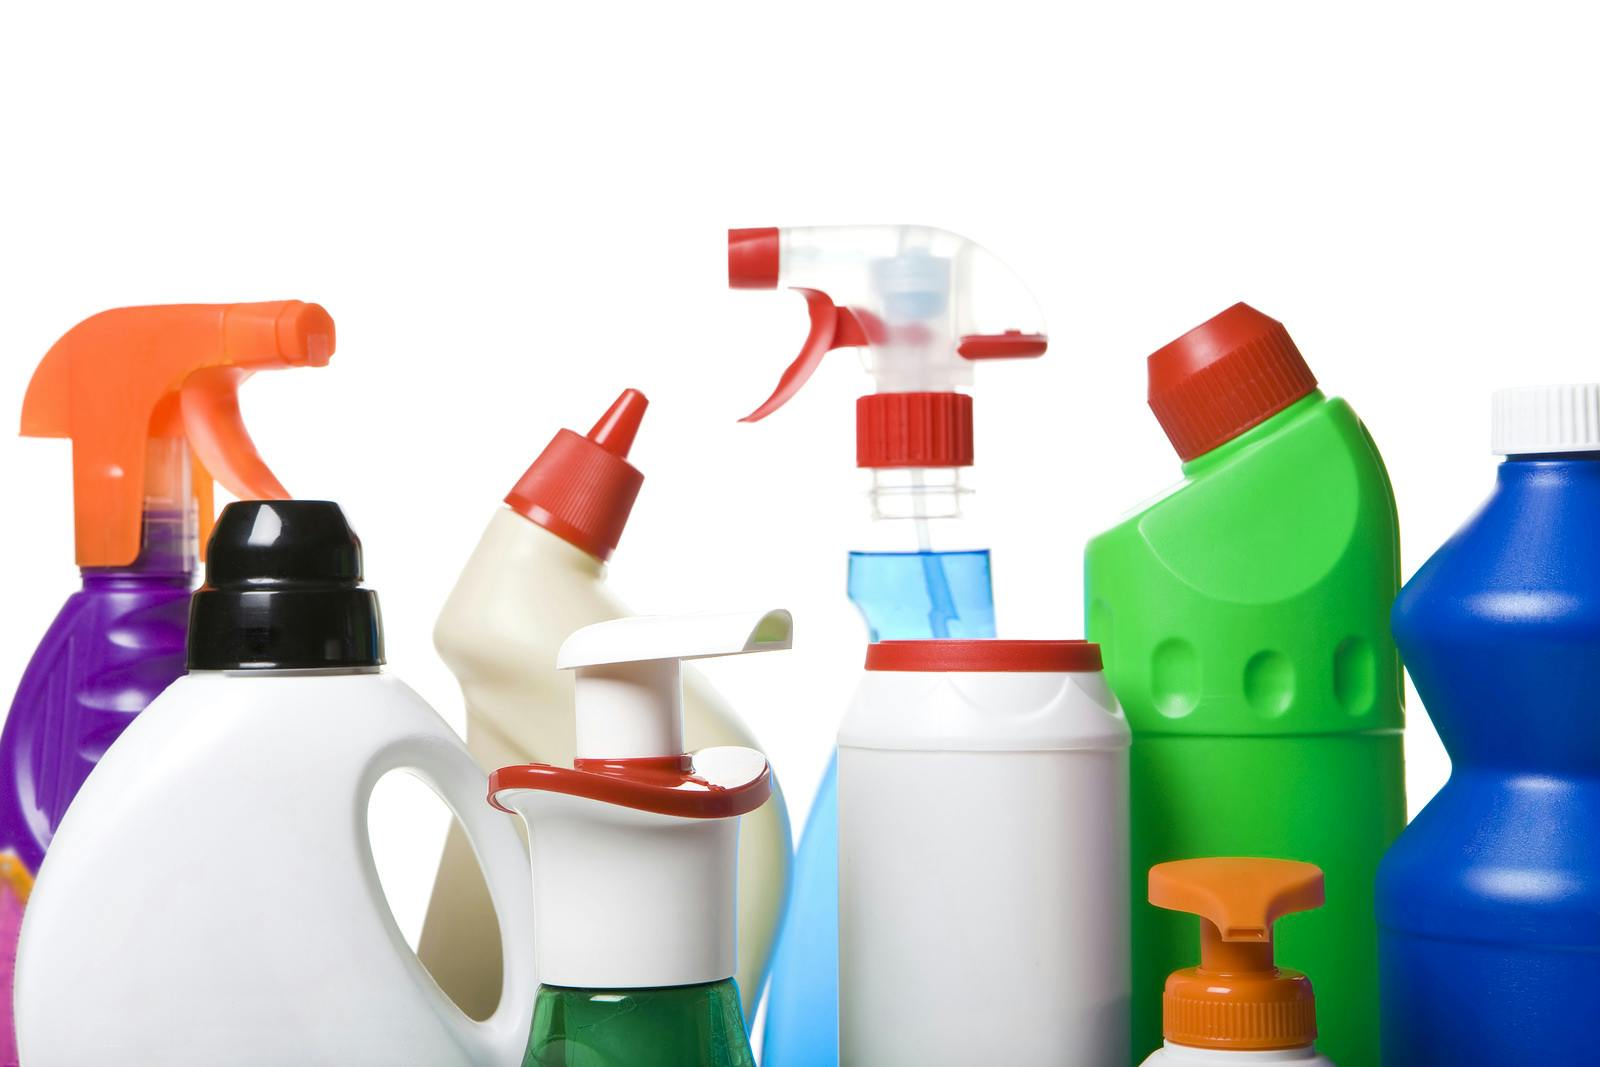 Several containers of household cleaners